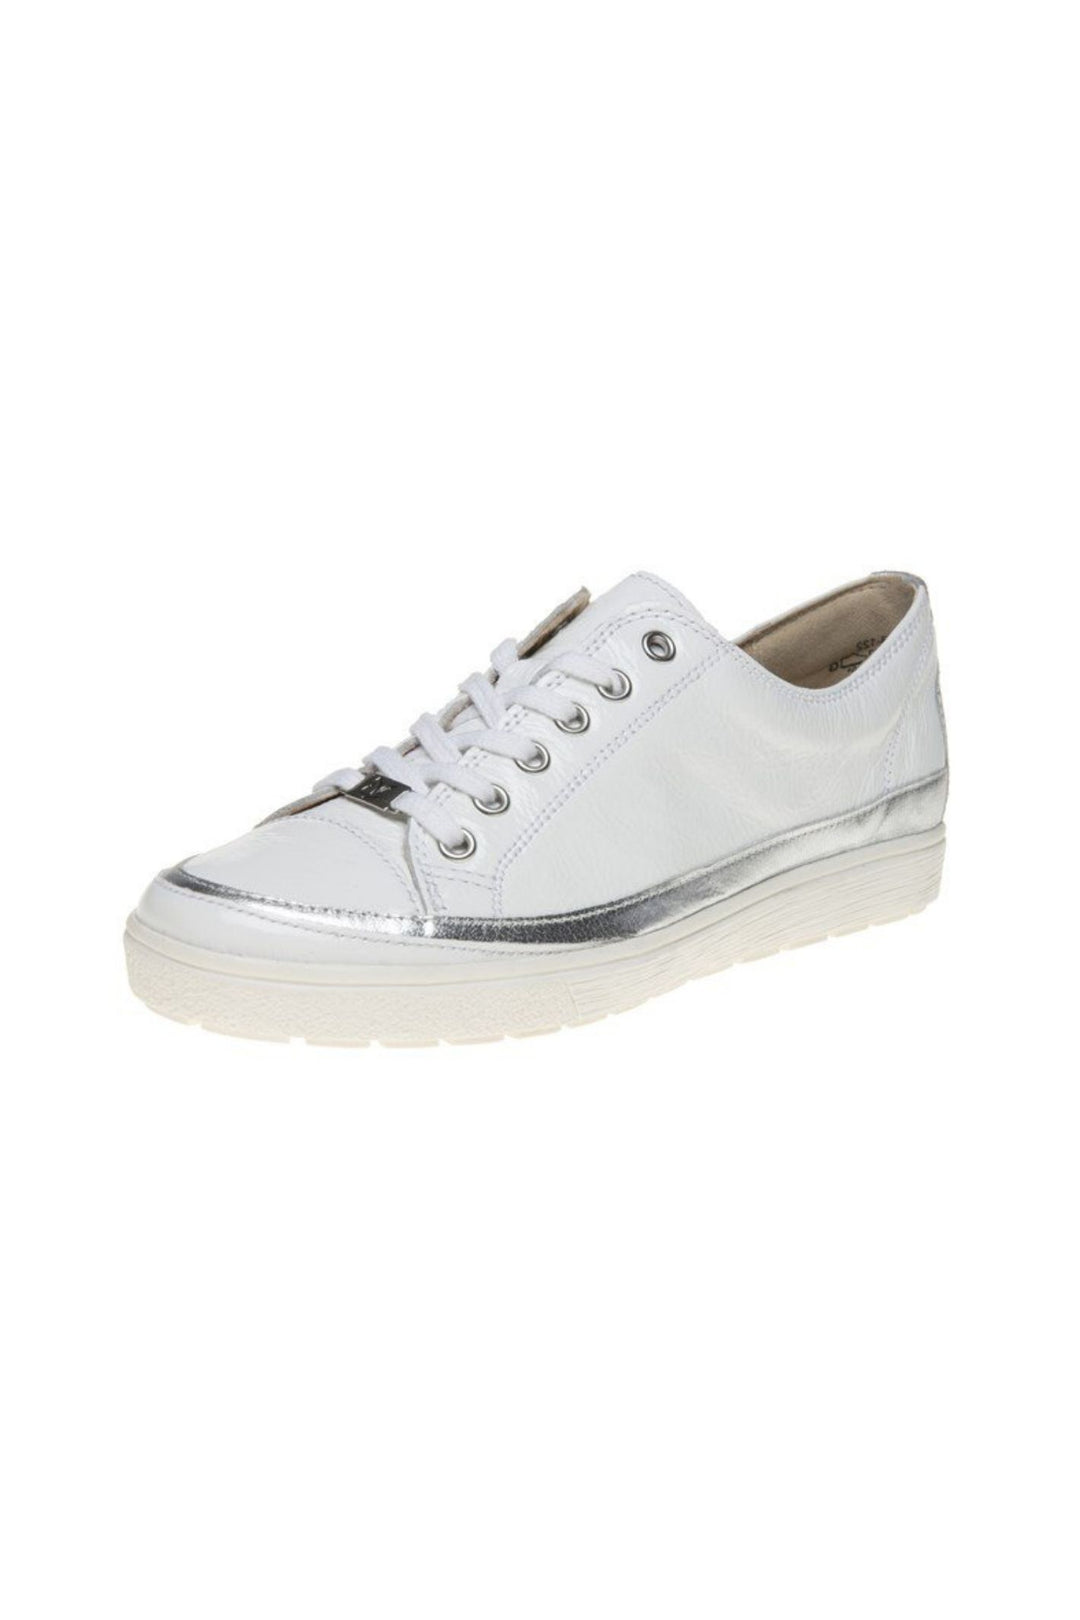 Caprice 23654 White Nappa Leather Trainers